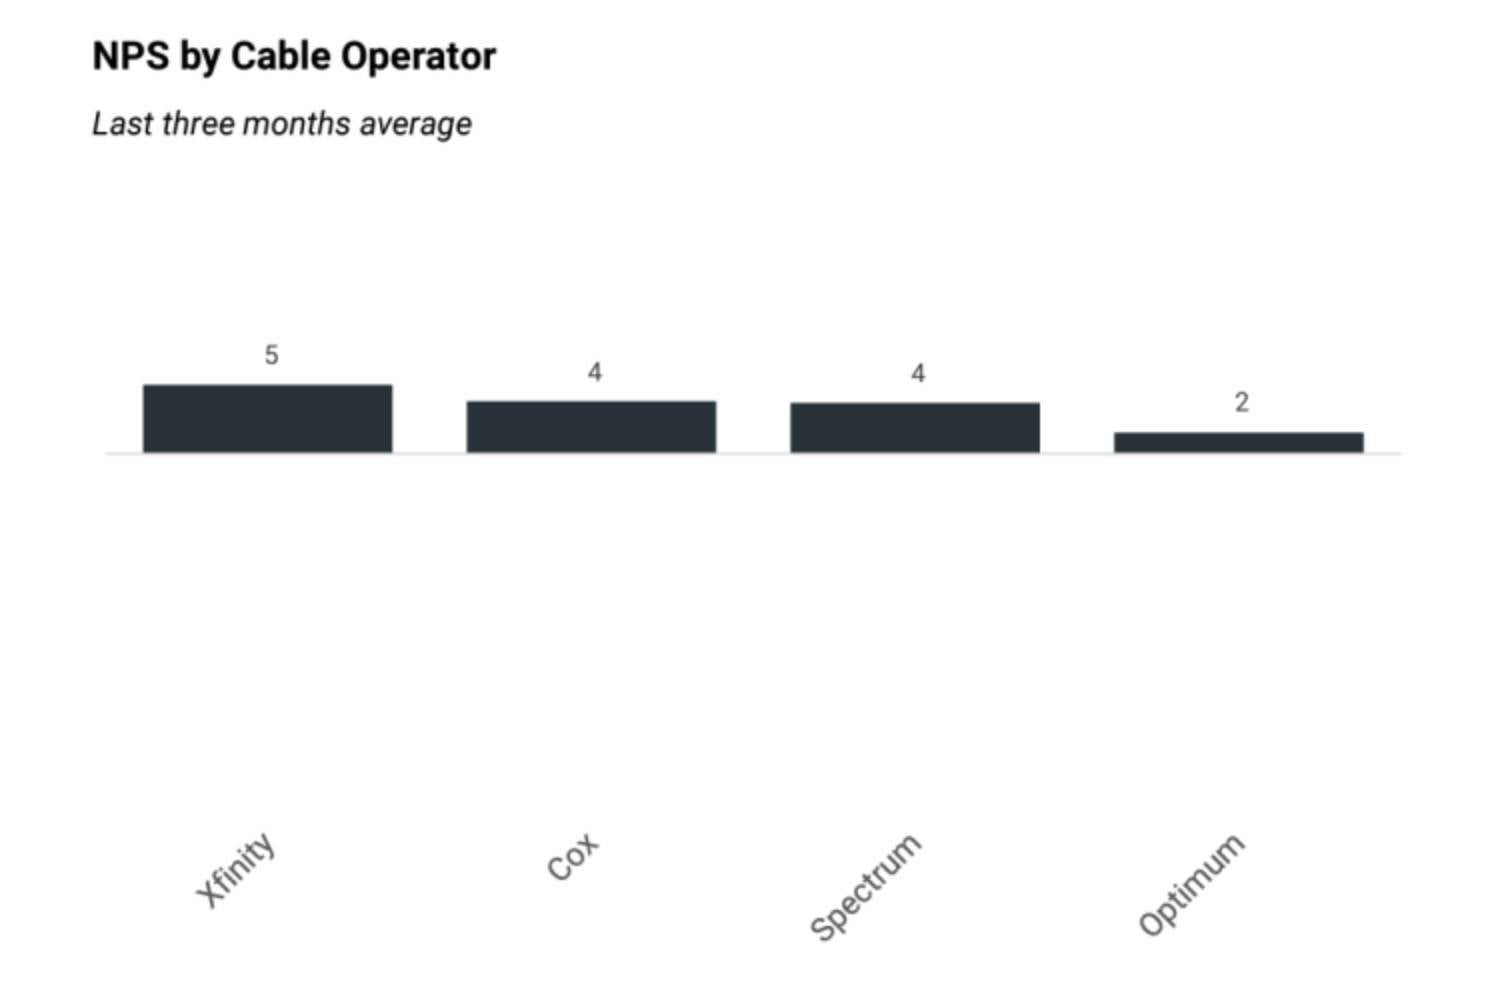 T-Mobile loses out to Verizon but demolishes competitors in customer loyalty survey